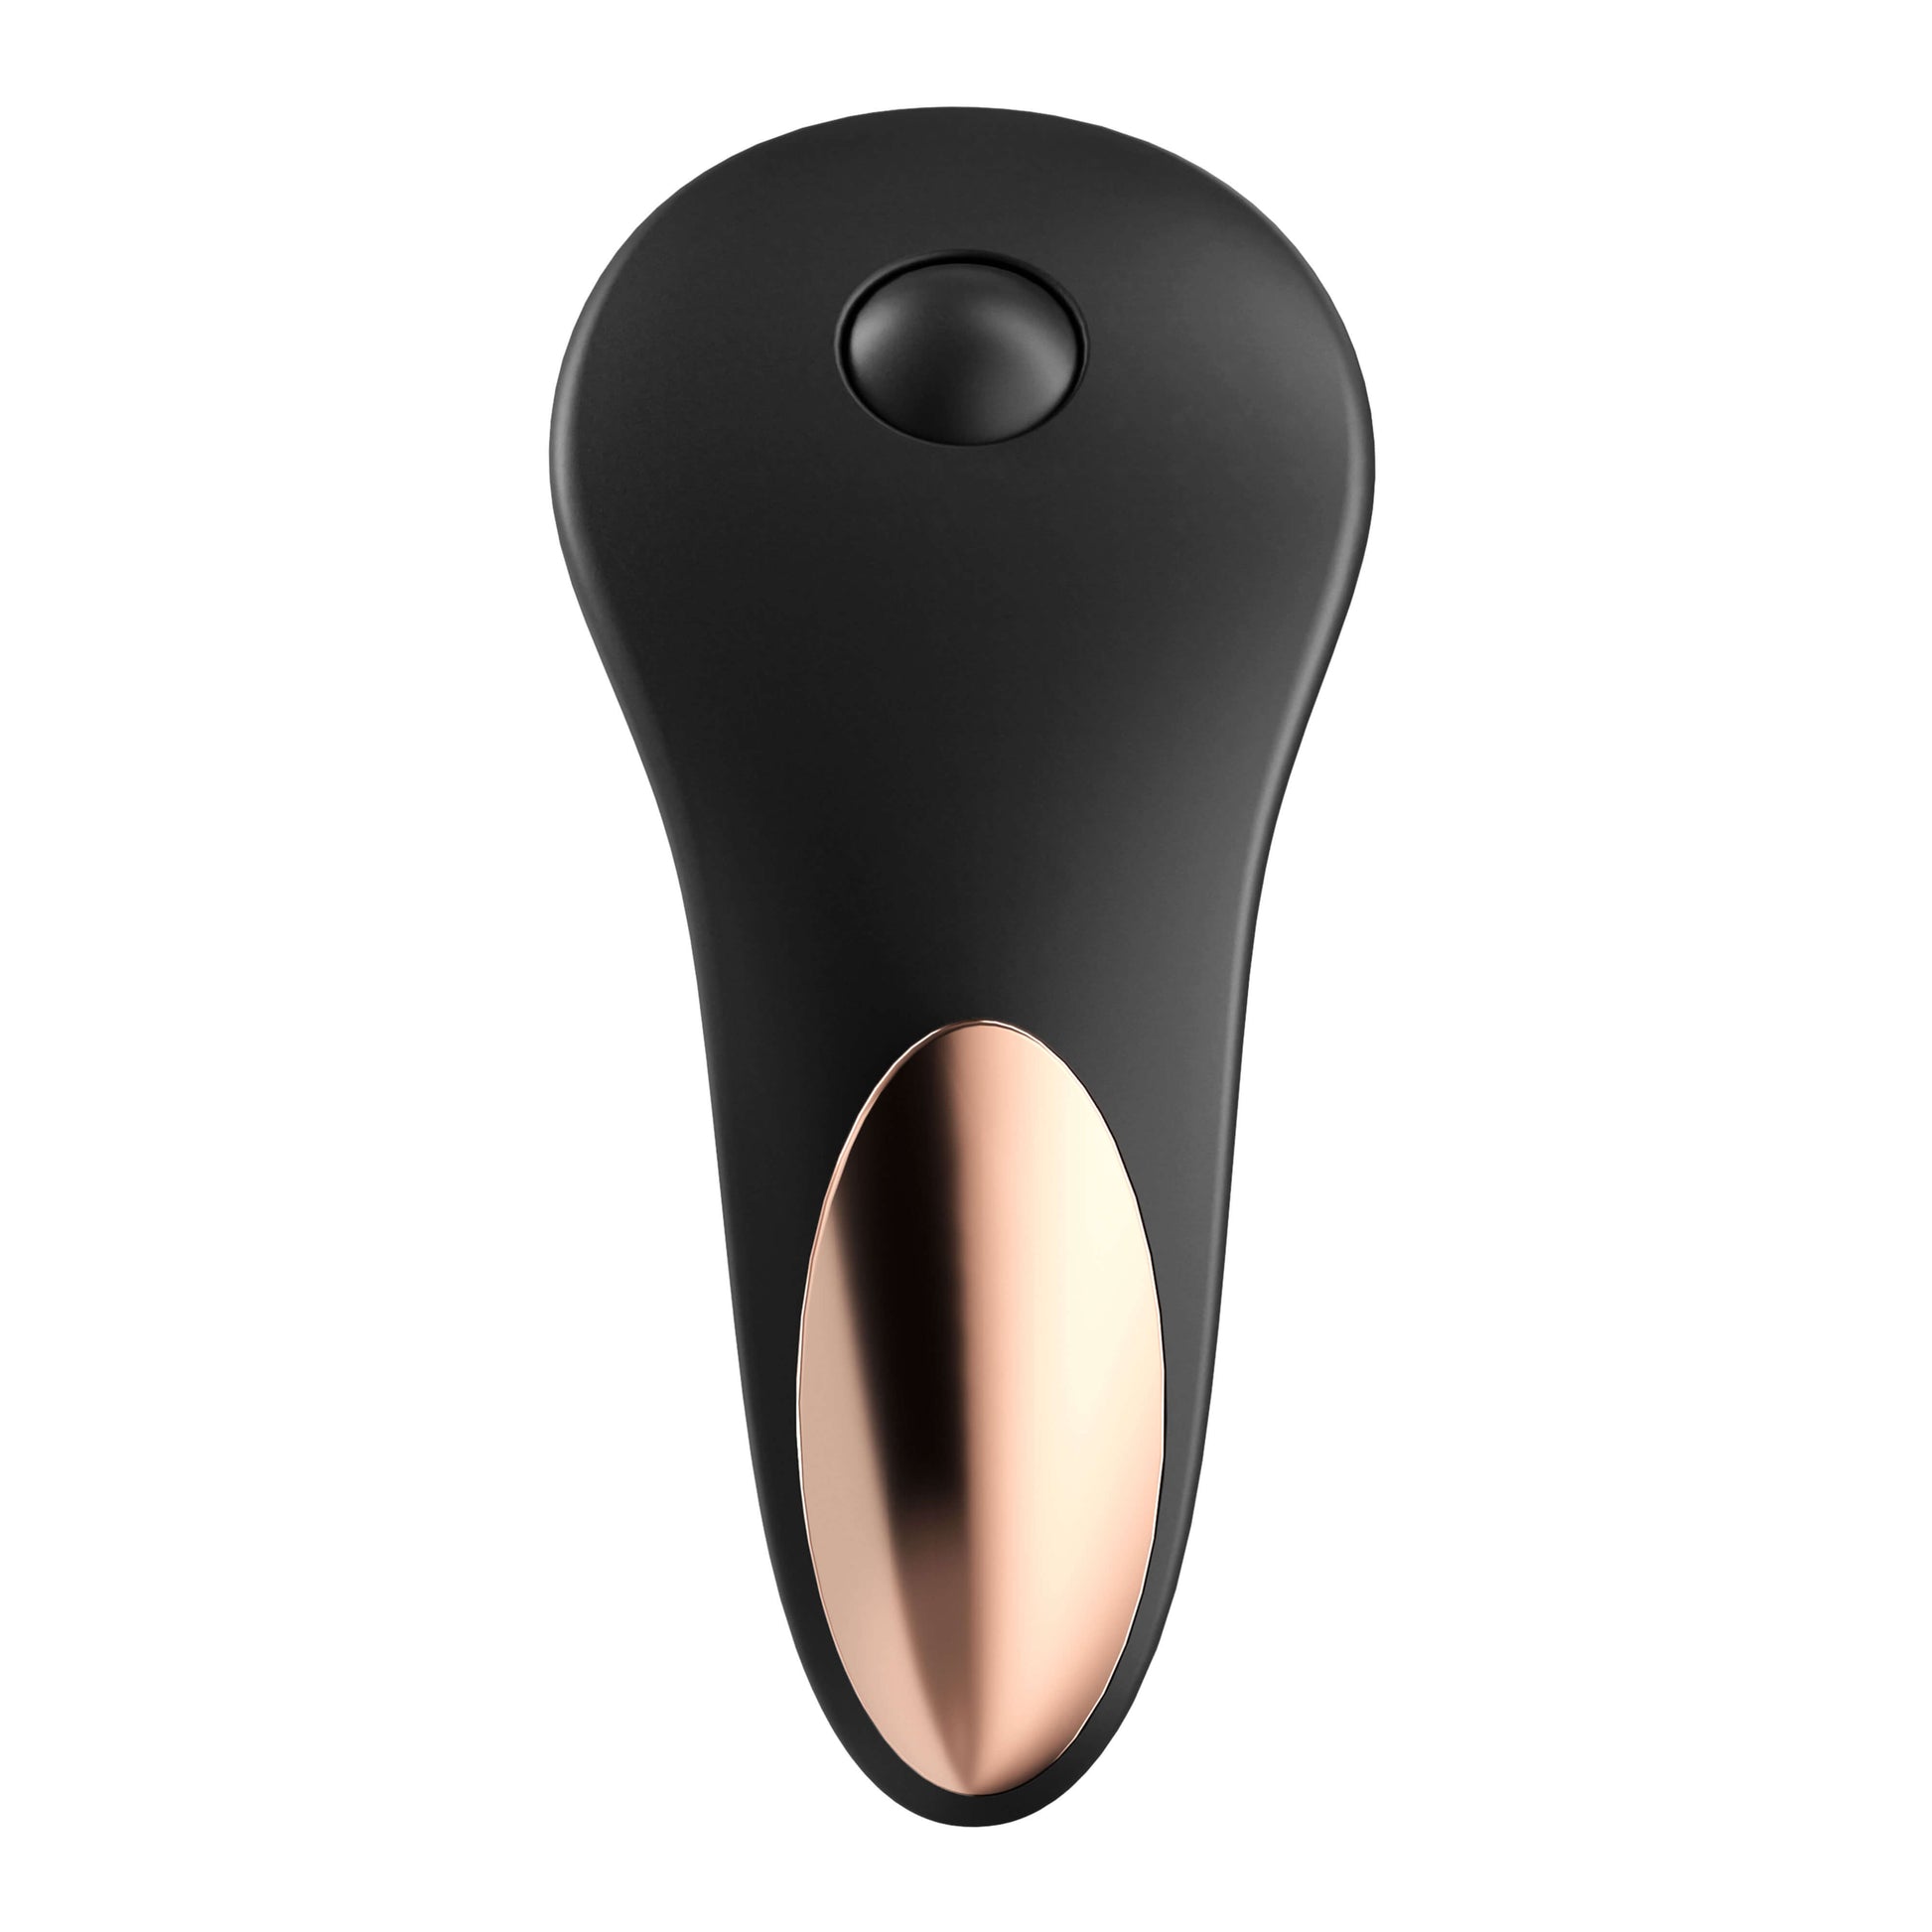 Satisfyer Little Secret Panty Vibrator - by The Bigger O - an online sex toy shop. We ship to USA, Canada and the UK.